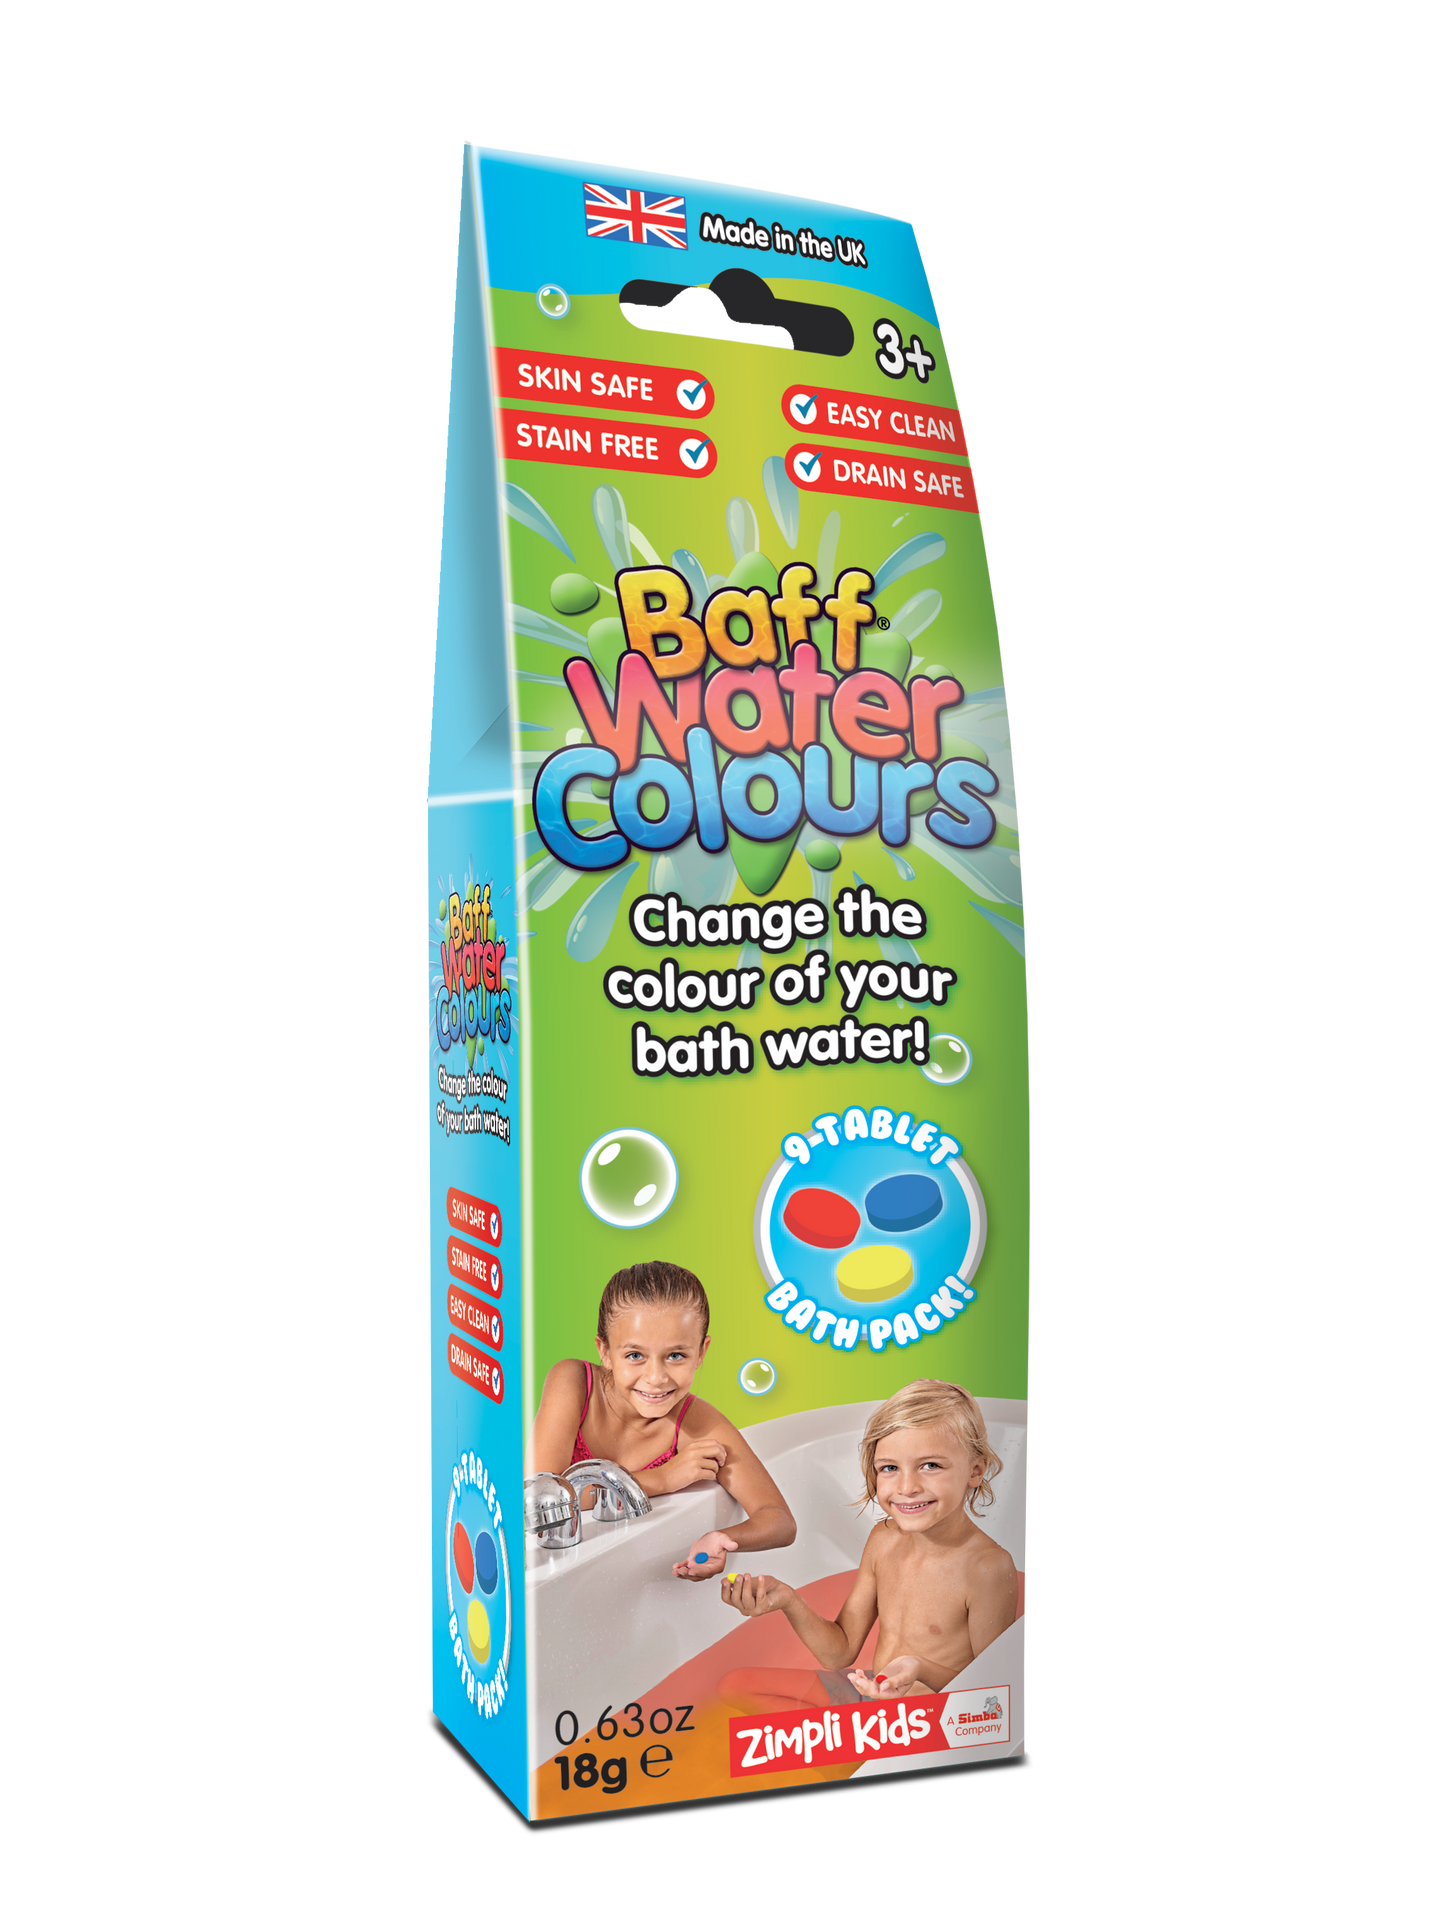 Baff Water Colours - Colour Changing Bath Tablets